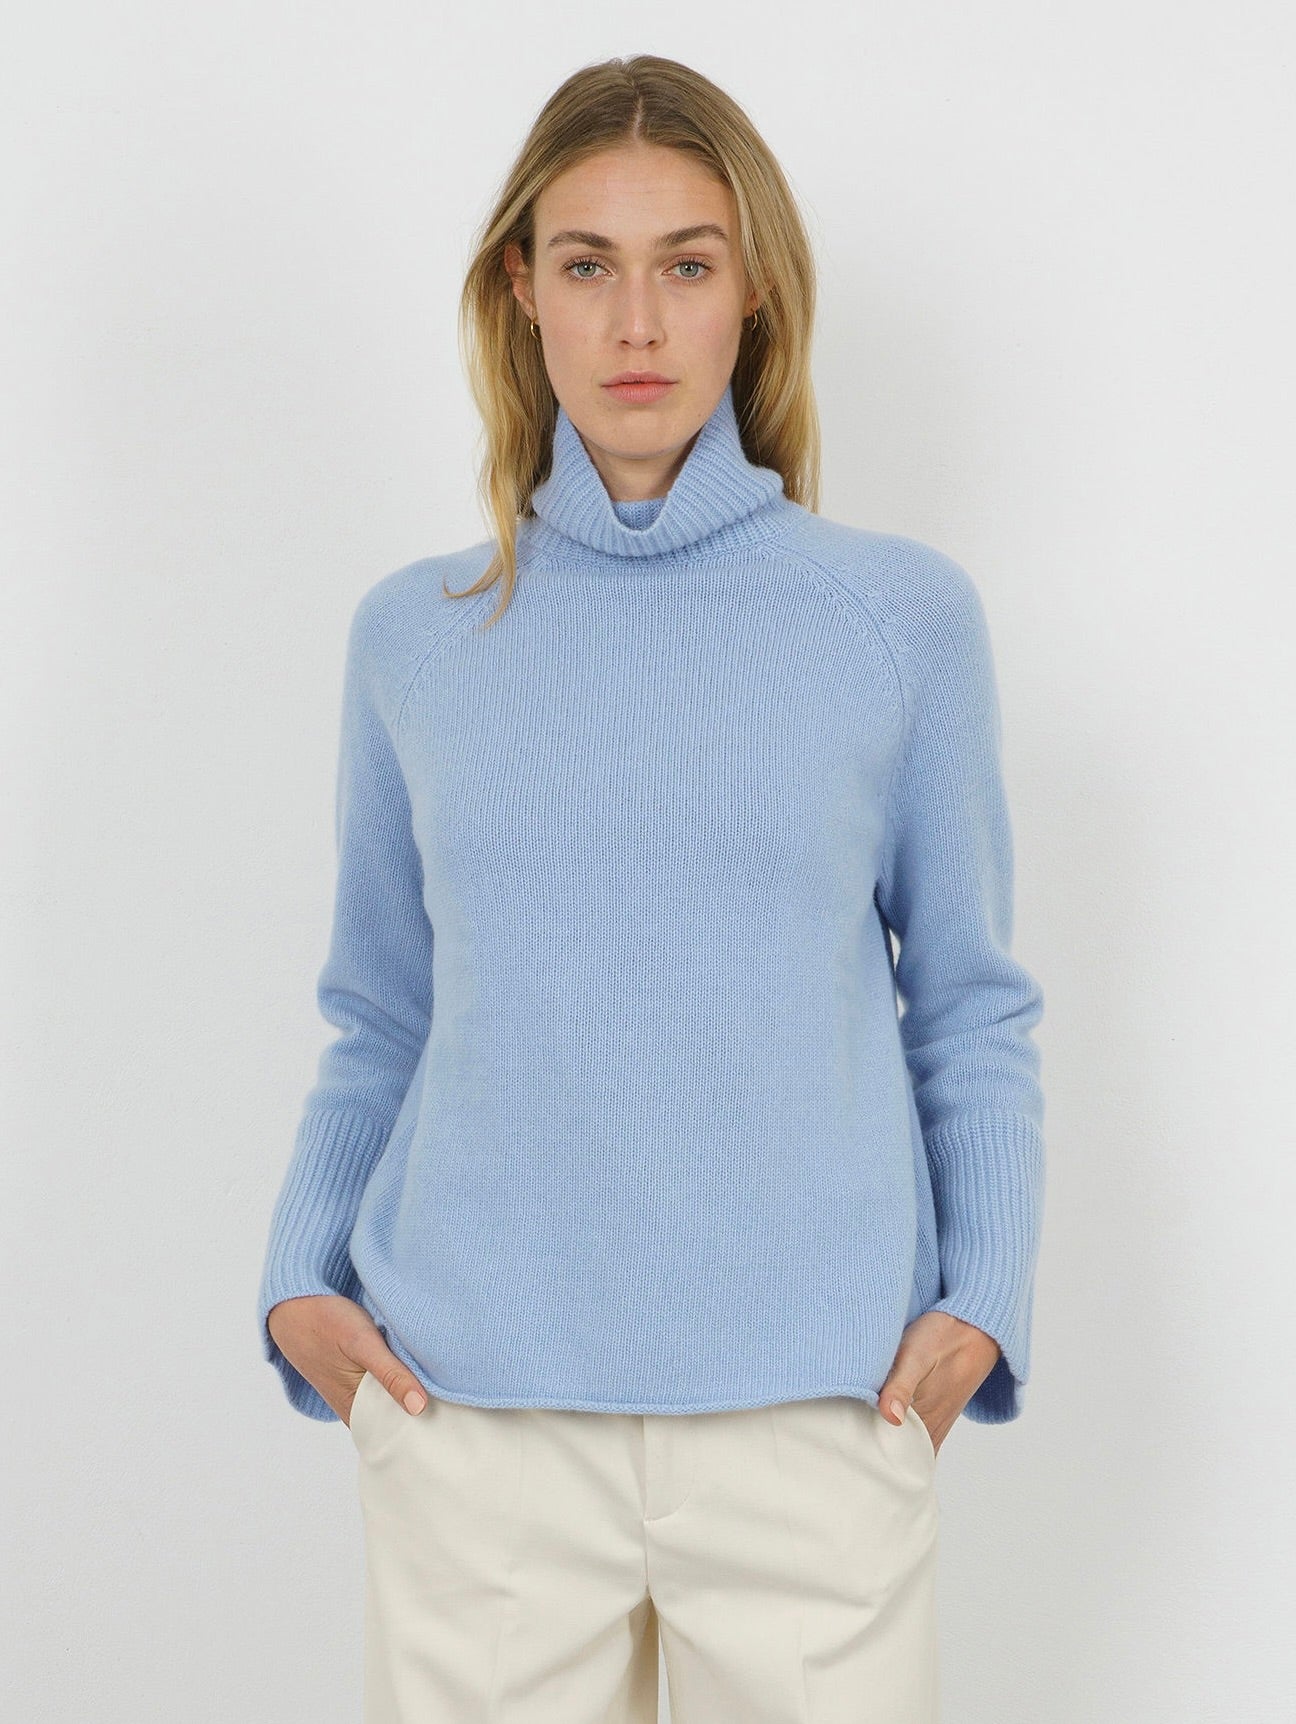 PIPPA SWEATER IN BABY GIRL BLUE